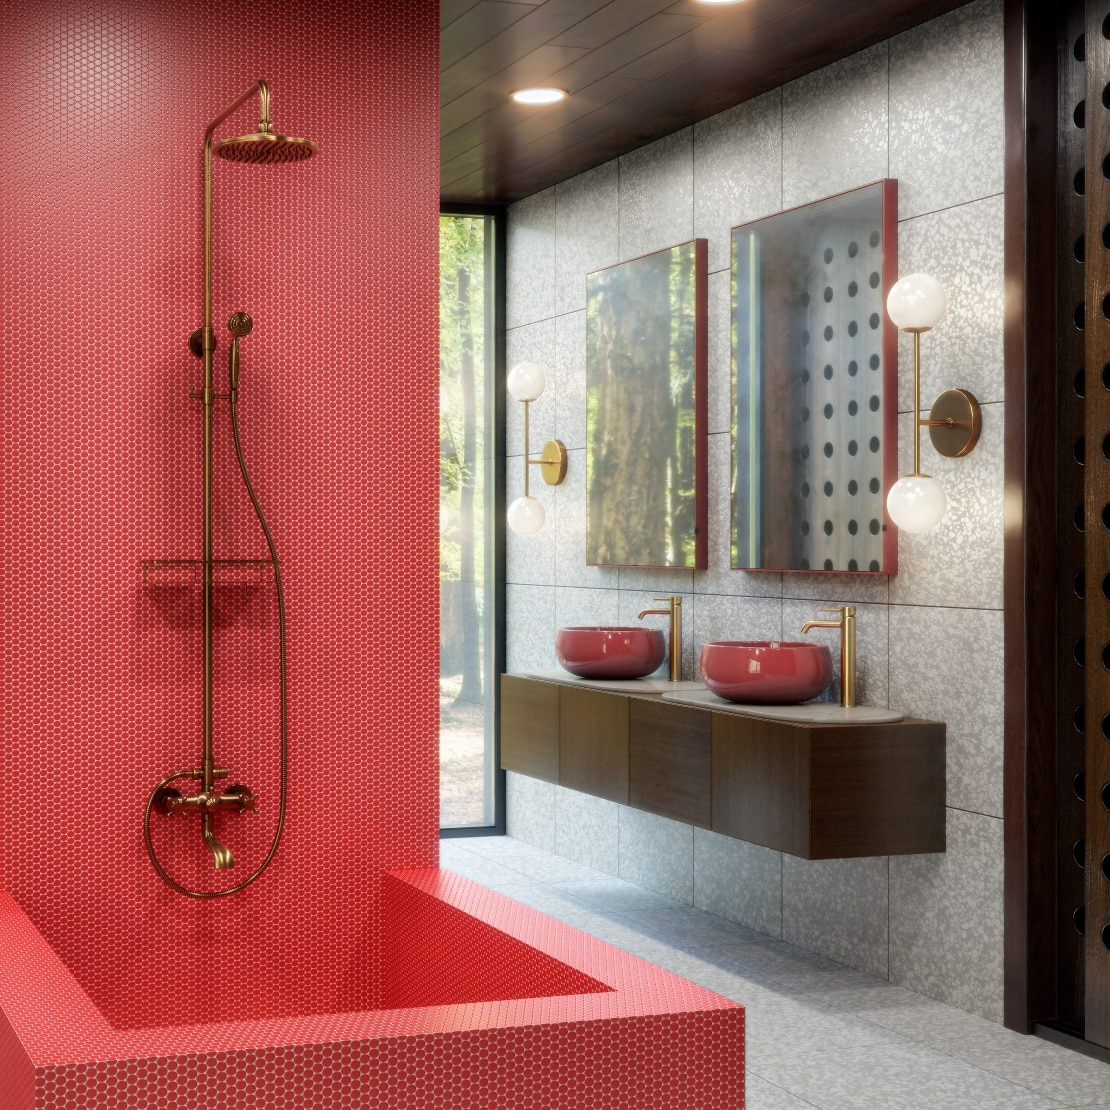 Red tiled bathtub with gold shower head and red sinks. 